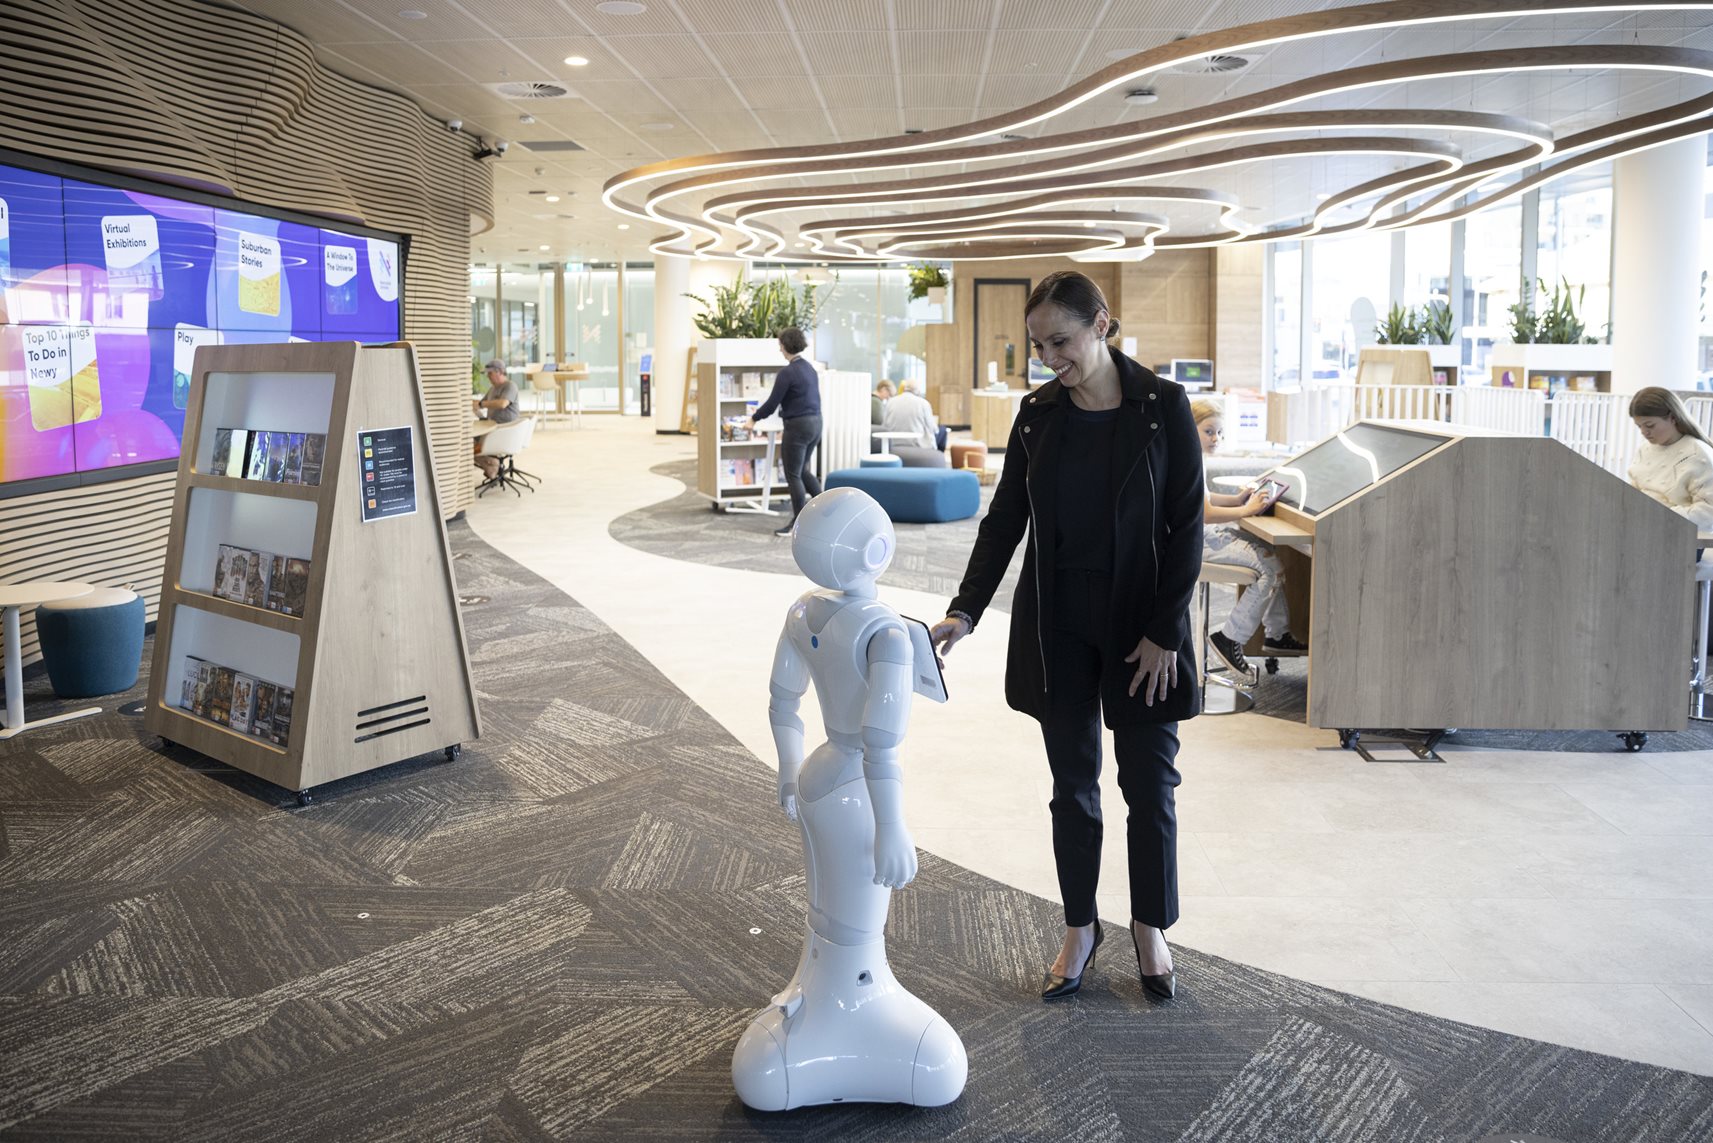 A woman greeting the robot at the digital library